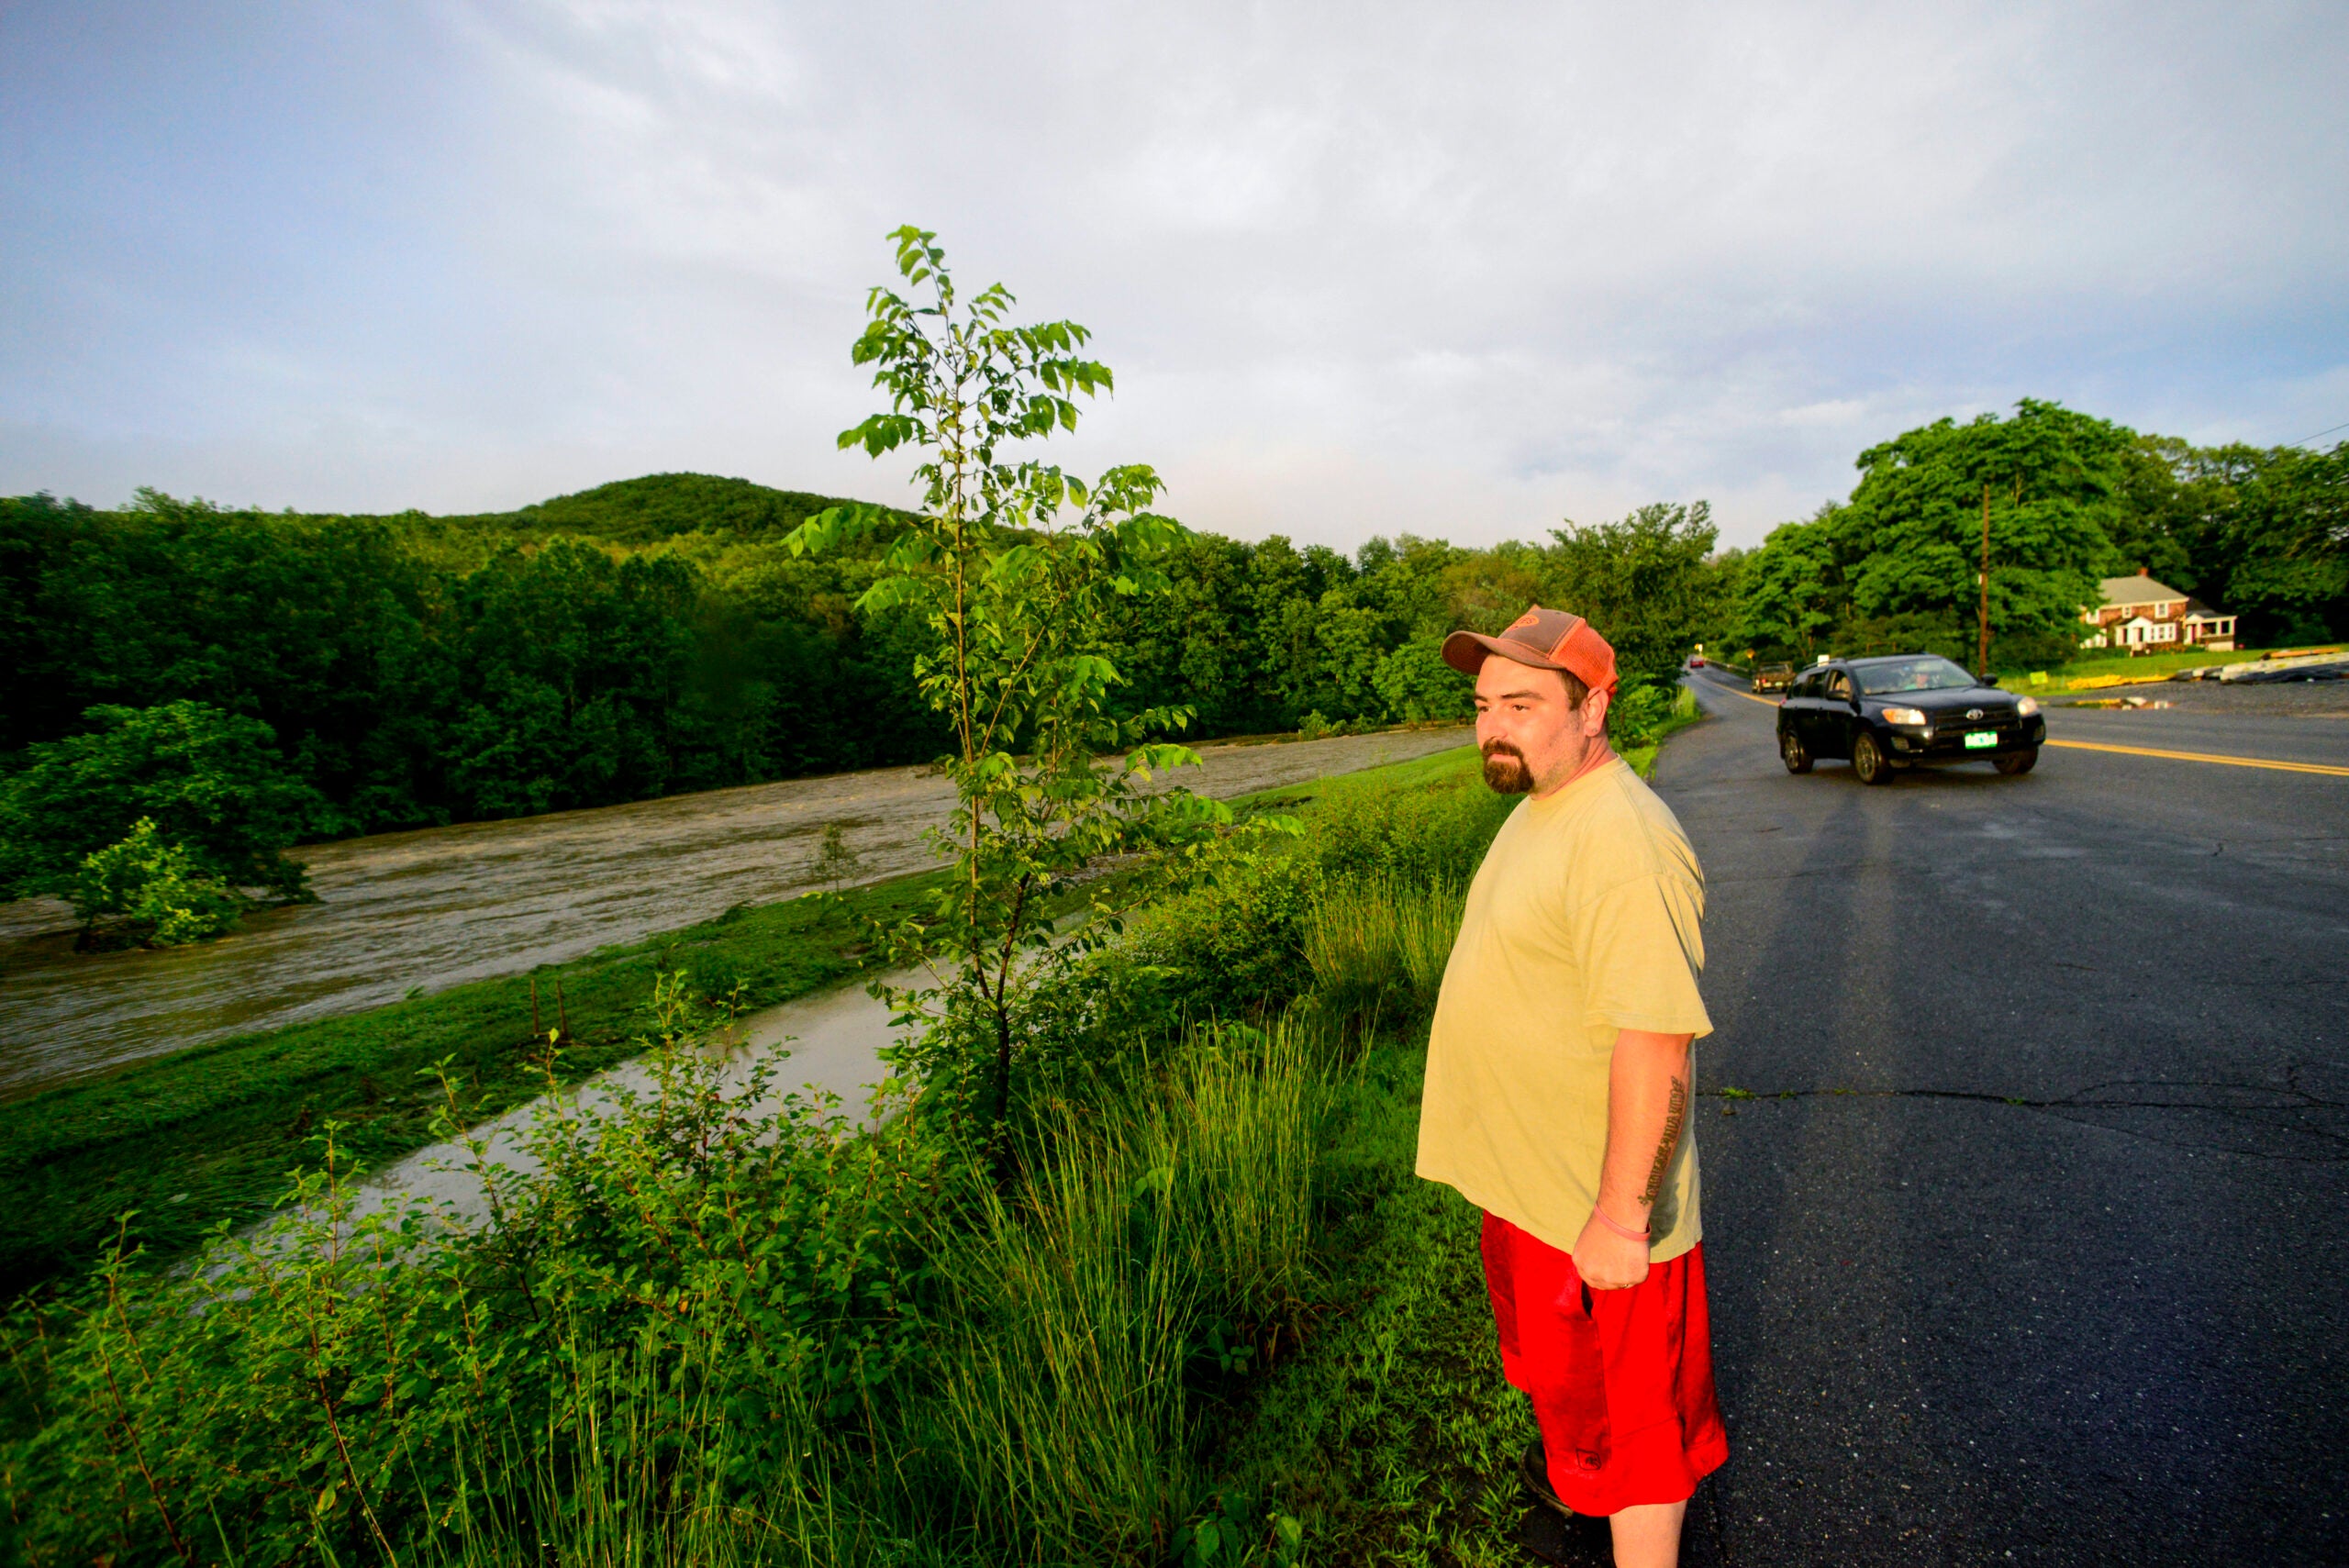 Leonard Derby, of Athens, Vt., watches the floodwaters from the Saxtons River pass through a field on Route 121 in Rockingham, Vt.